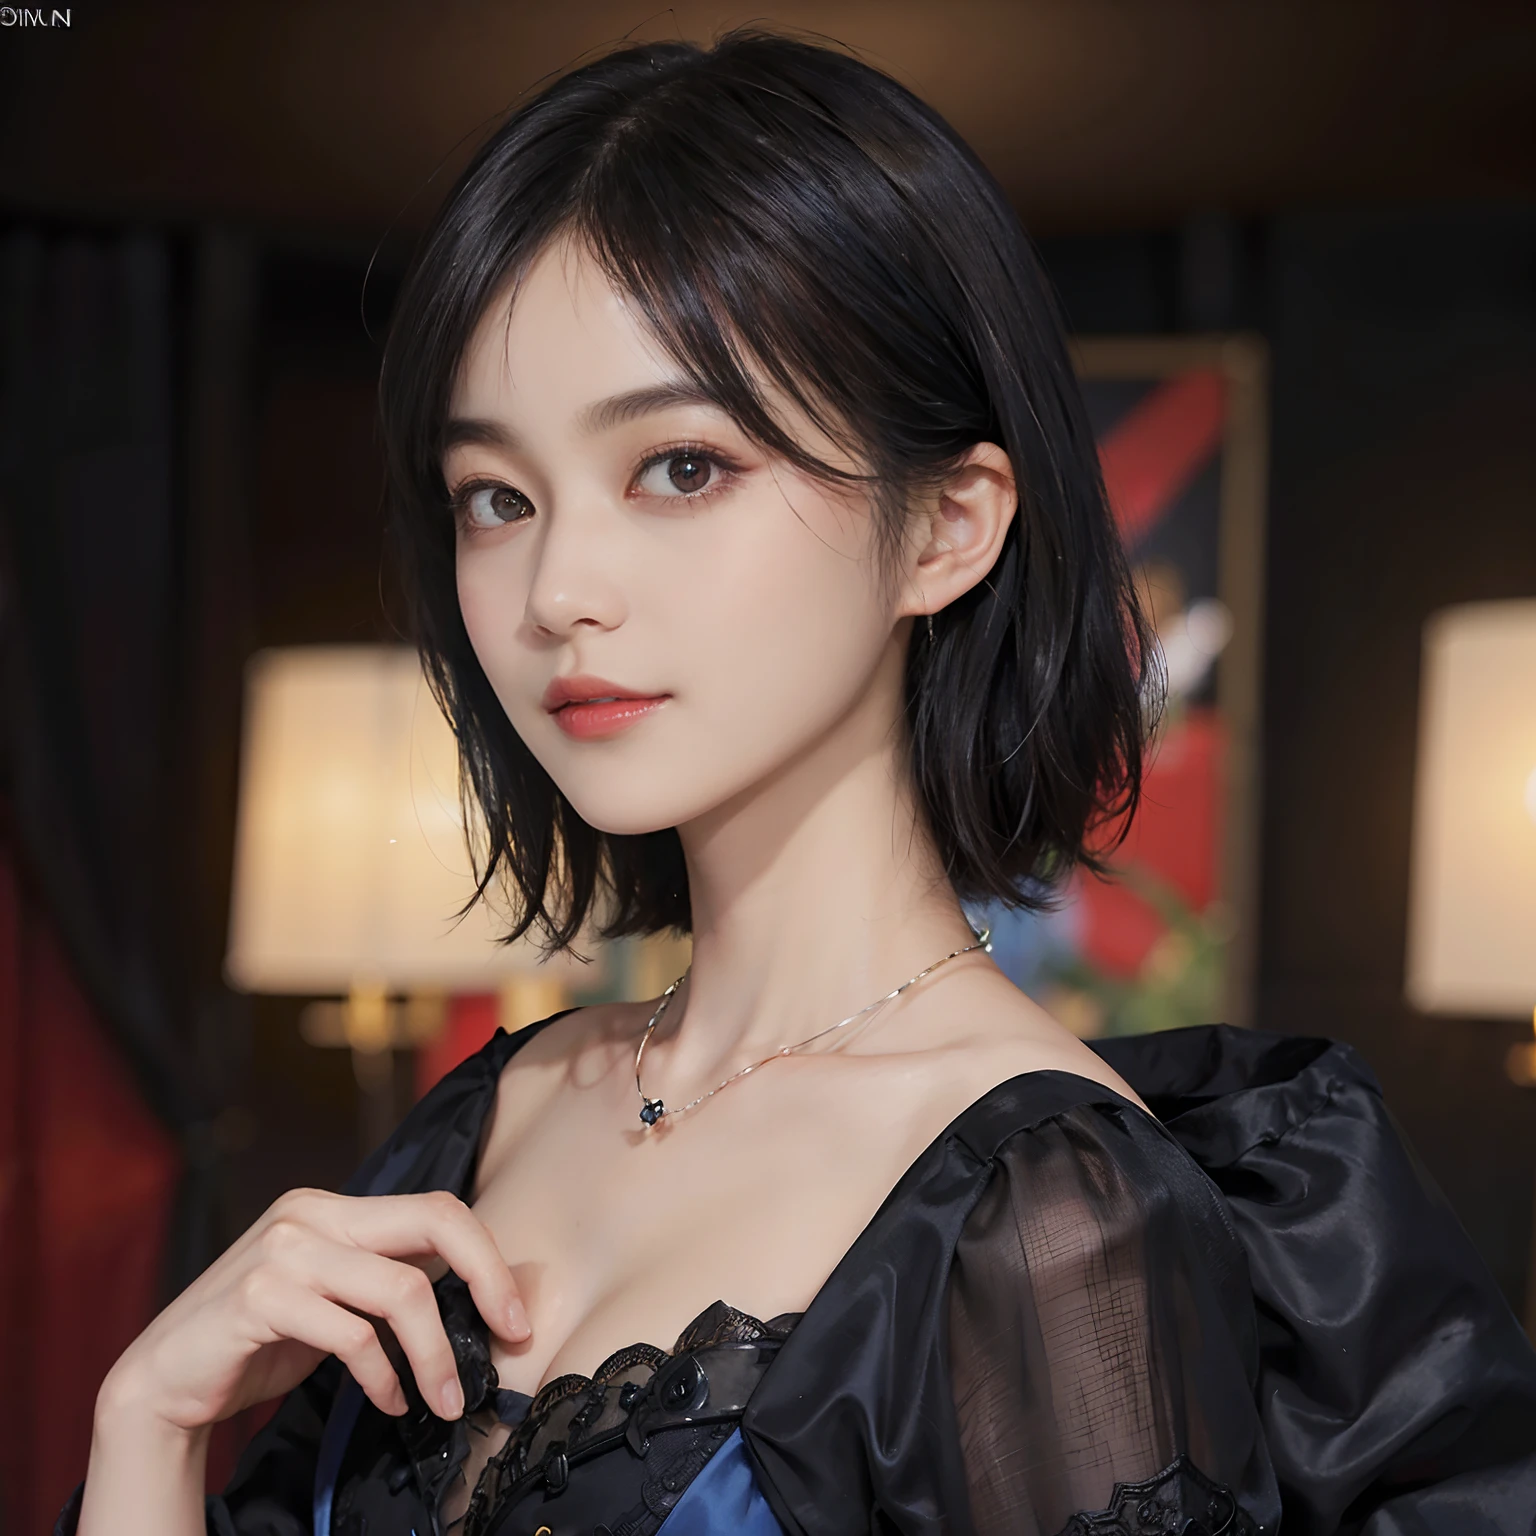 ((1womanl)),  (((Black-short-hair))), （masuter piece：1,3）、top-quality、​masterpiece、hight resolution、Original、highly detailed wallpaper、dress code、Luxurious necklace, (A slight smil)、a small face、((breast))、(Red and blue dresses)、(light on face)、Live-action style, Beautiful facial features, darkened room, ((Hu Dilan)), Masquerade, (fancy-dress),masquerade 